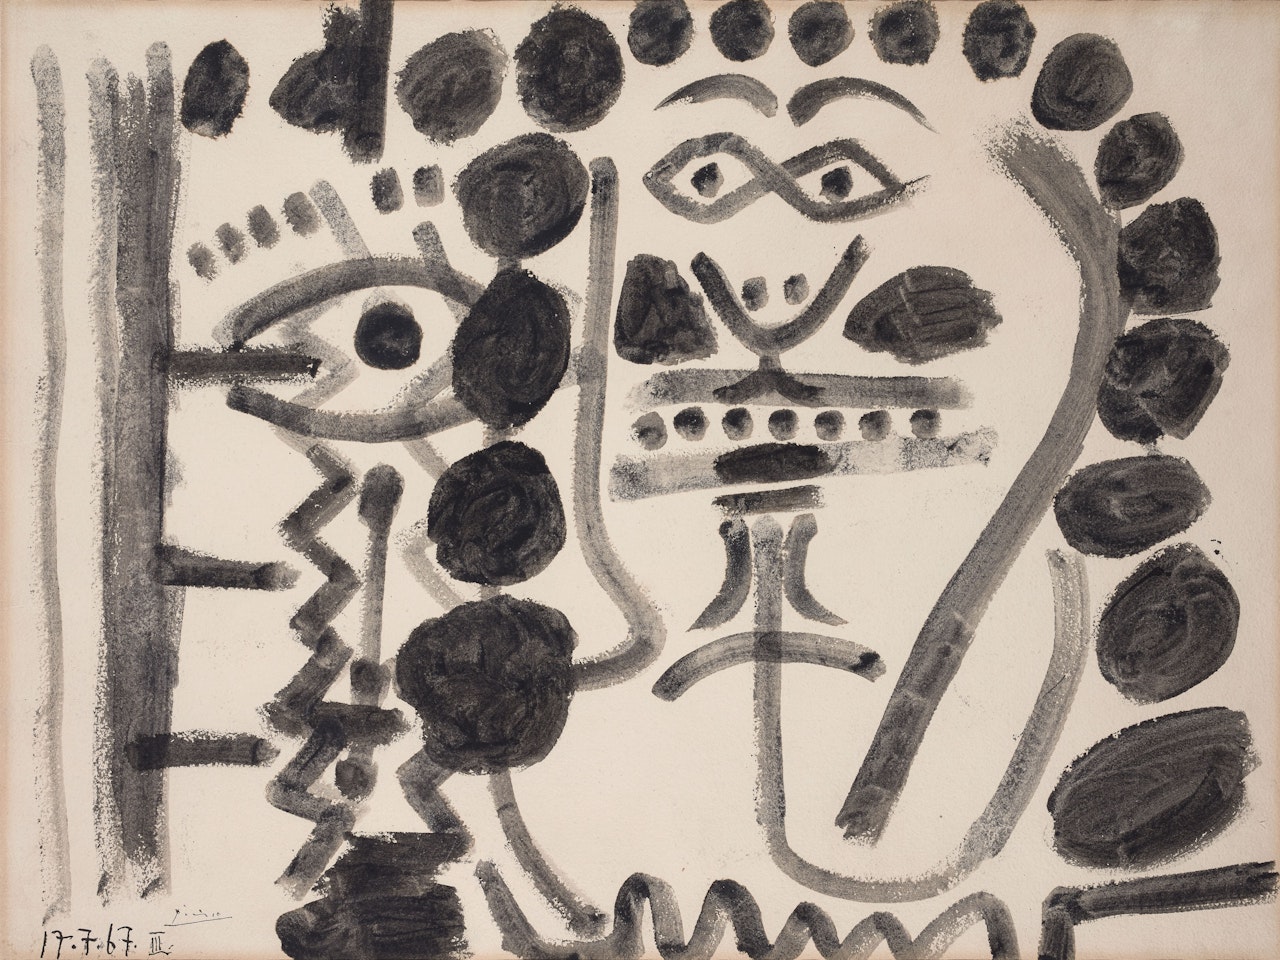 Tête by Pablo Picasso